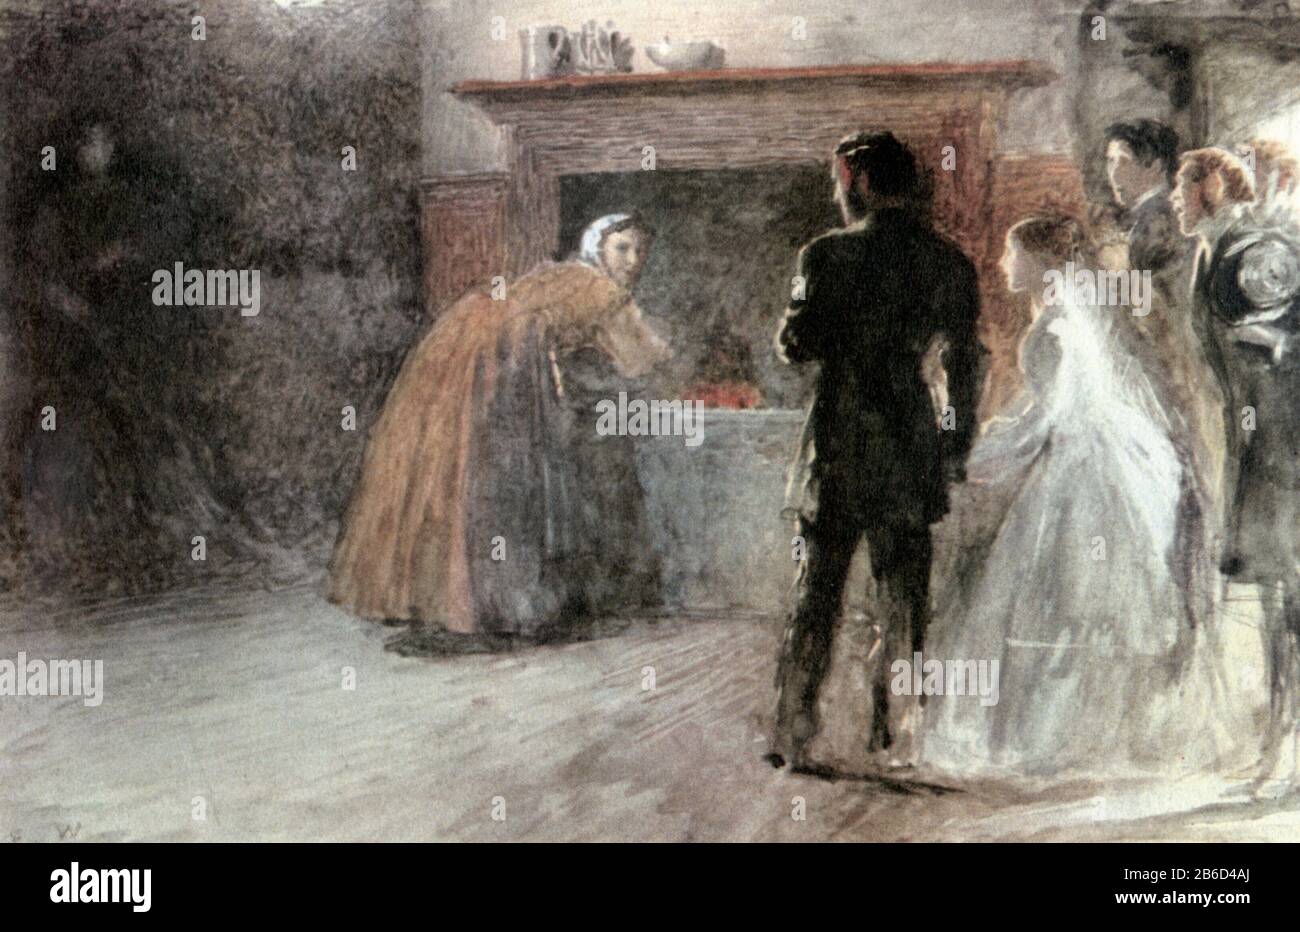 Jane Eyre and Edward Rochester are met by Mrs Fairfax as they arrive at Thornfield Hall to visit the mad woman after their interrupted marriage ceremony. 19th century. By Frederick Walker (1840-1875). Illustration to Jane Eyre by Charlotte Bronte. Jane Eyre (originally published as Jane Eyre: An Autobiography) is a novel by English writer Charlotte Brontë, published under the pen name Currer Bell, 16th October 1847, by Smith, Elder & Co. of London. Stock Photo